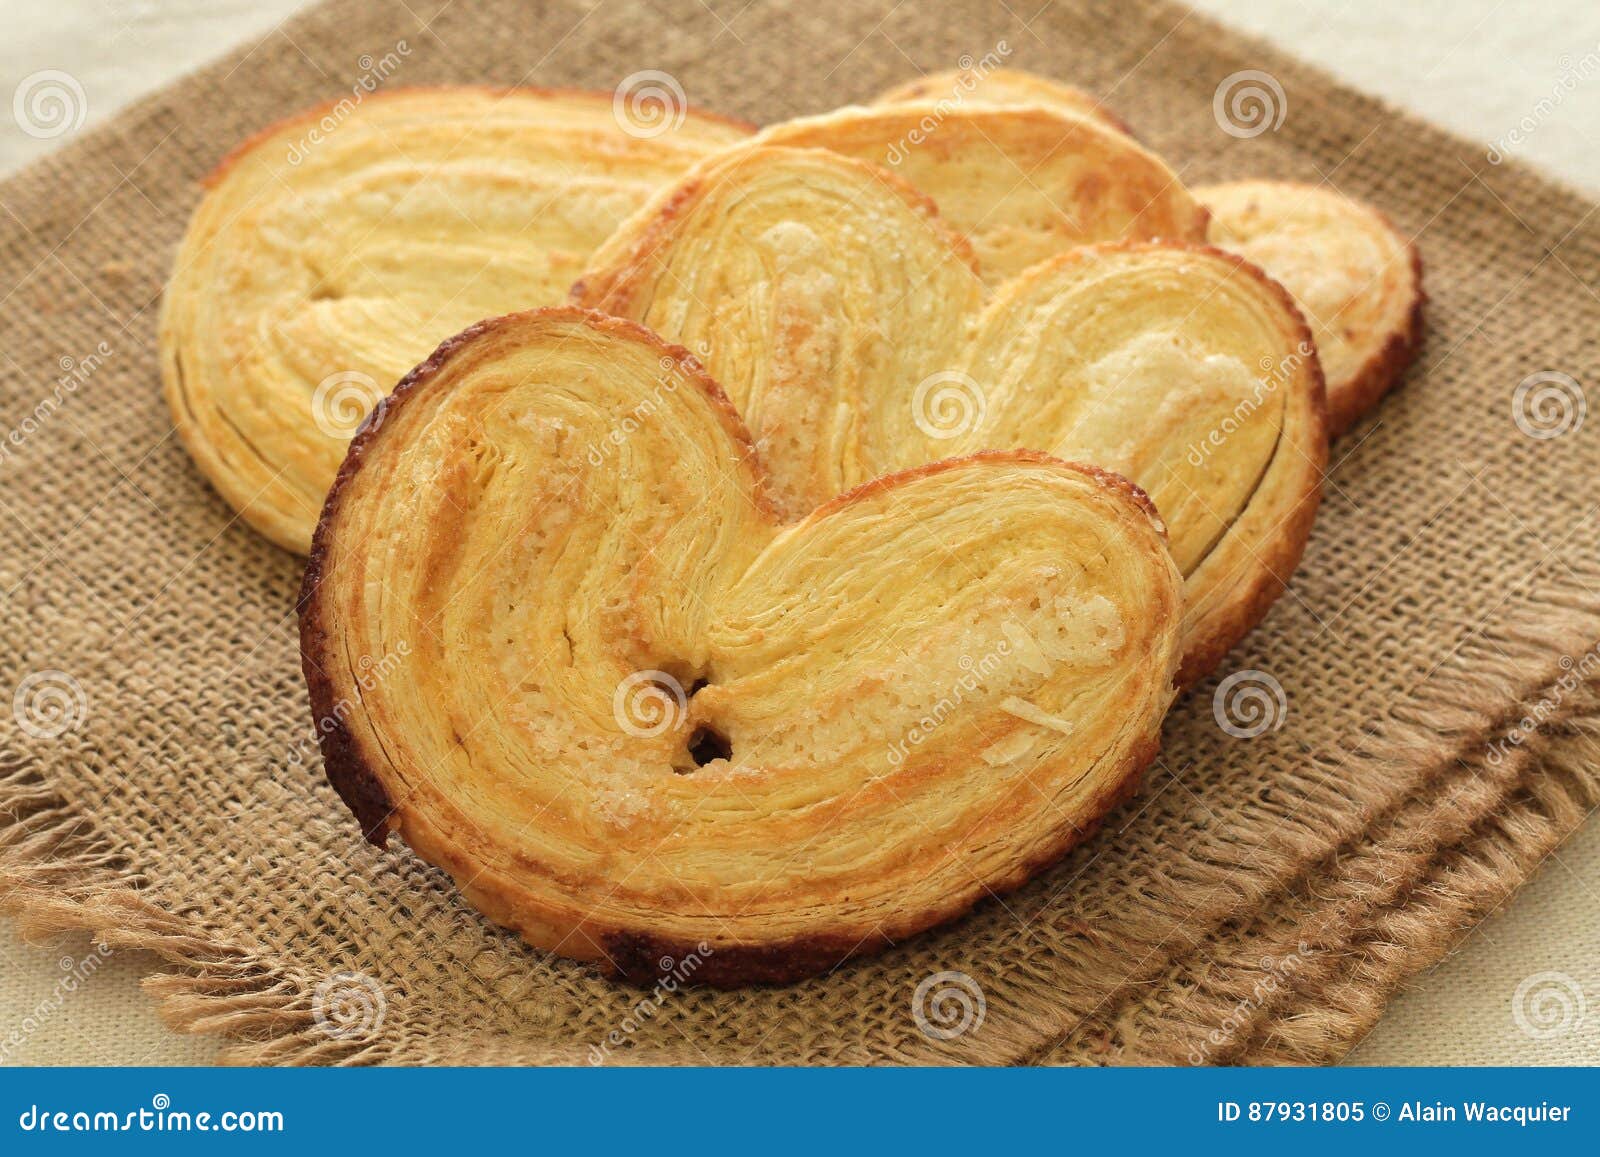 palmera palmier sweet puff pastry